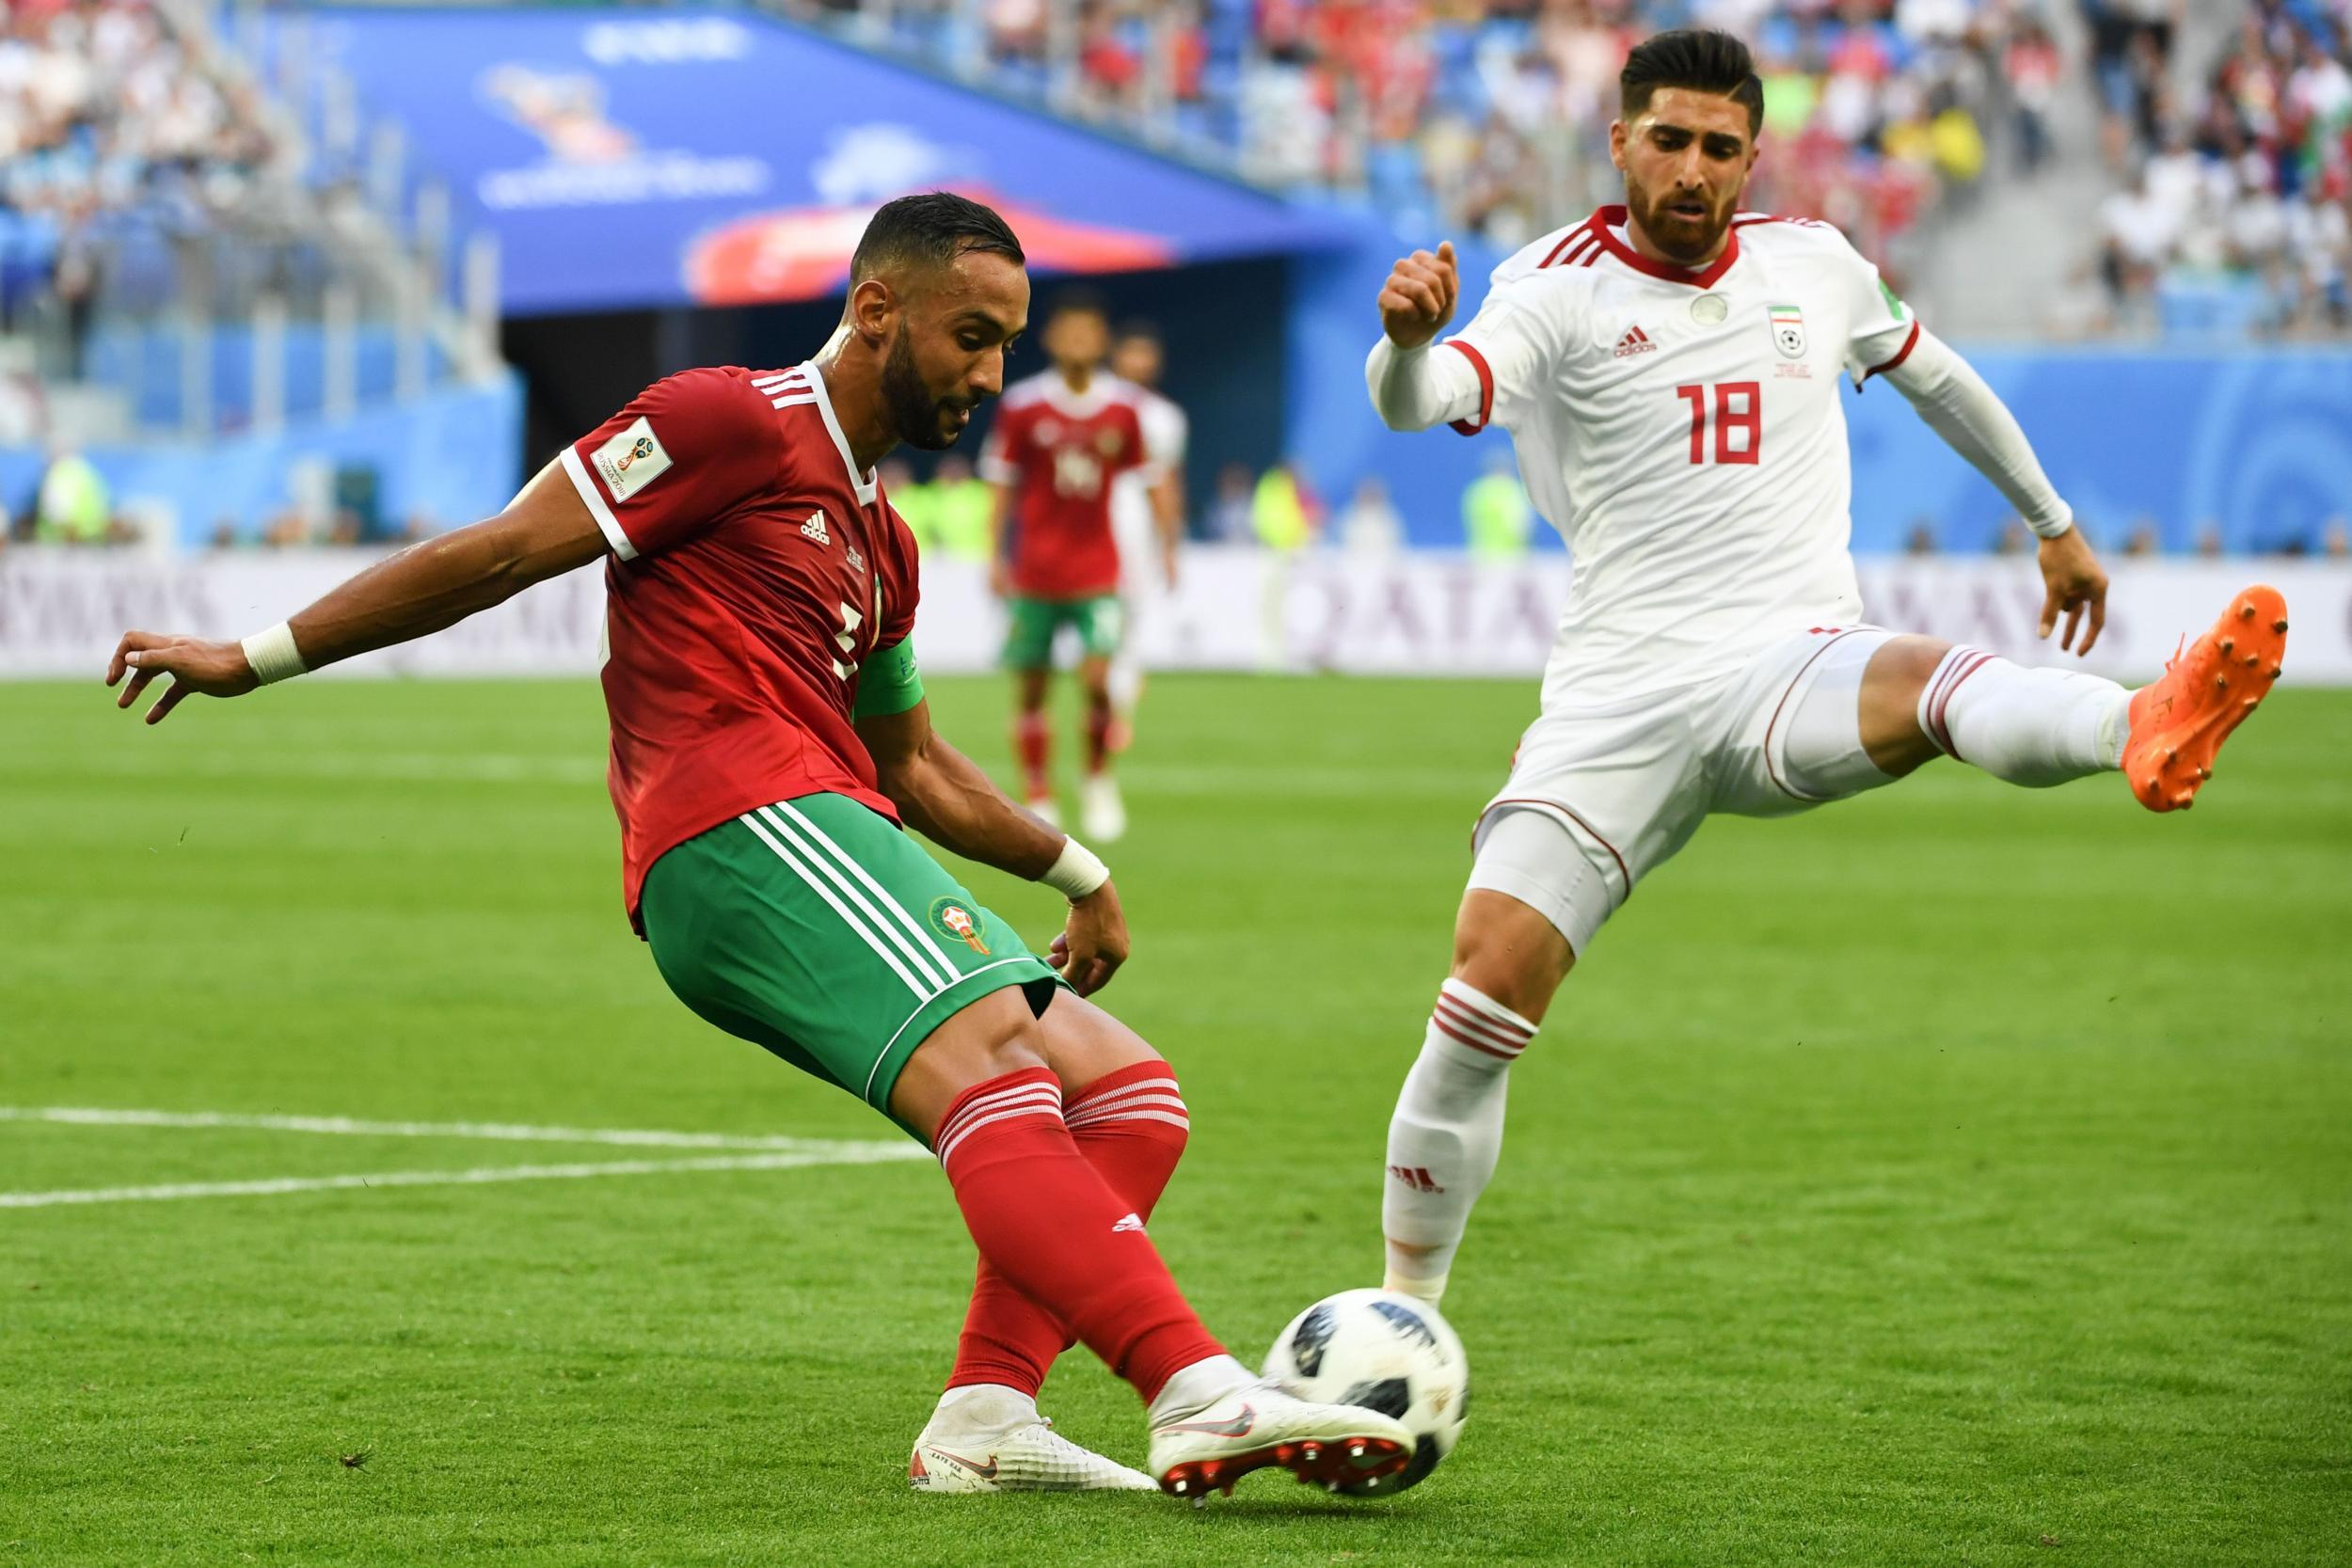 World Cup 2018 scouting report: Hakim Ziyech misses his chance as